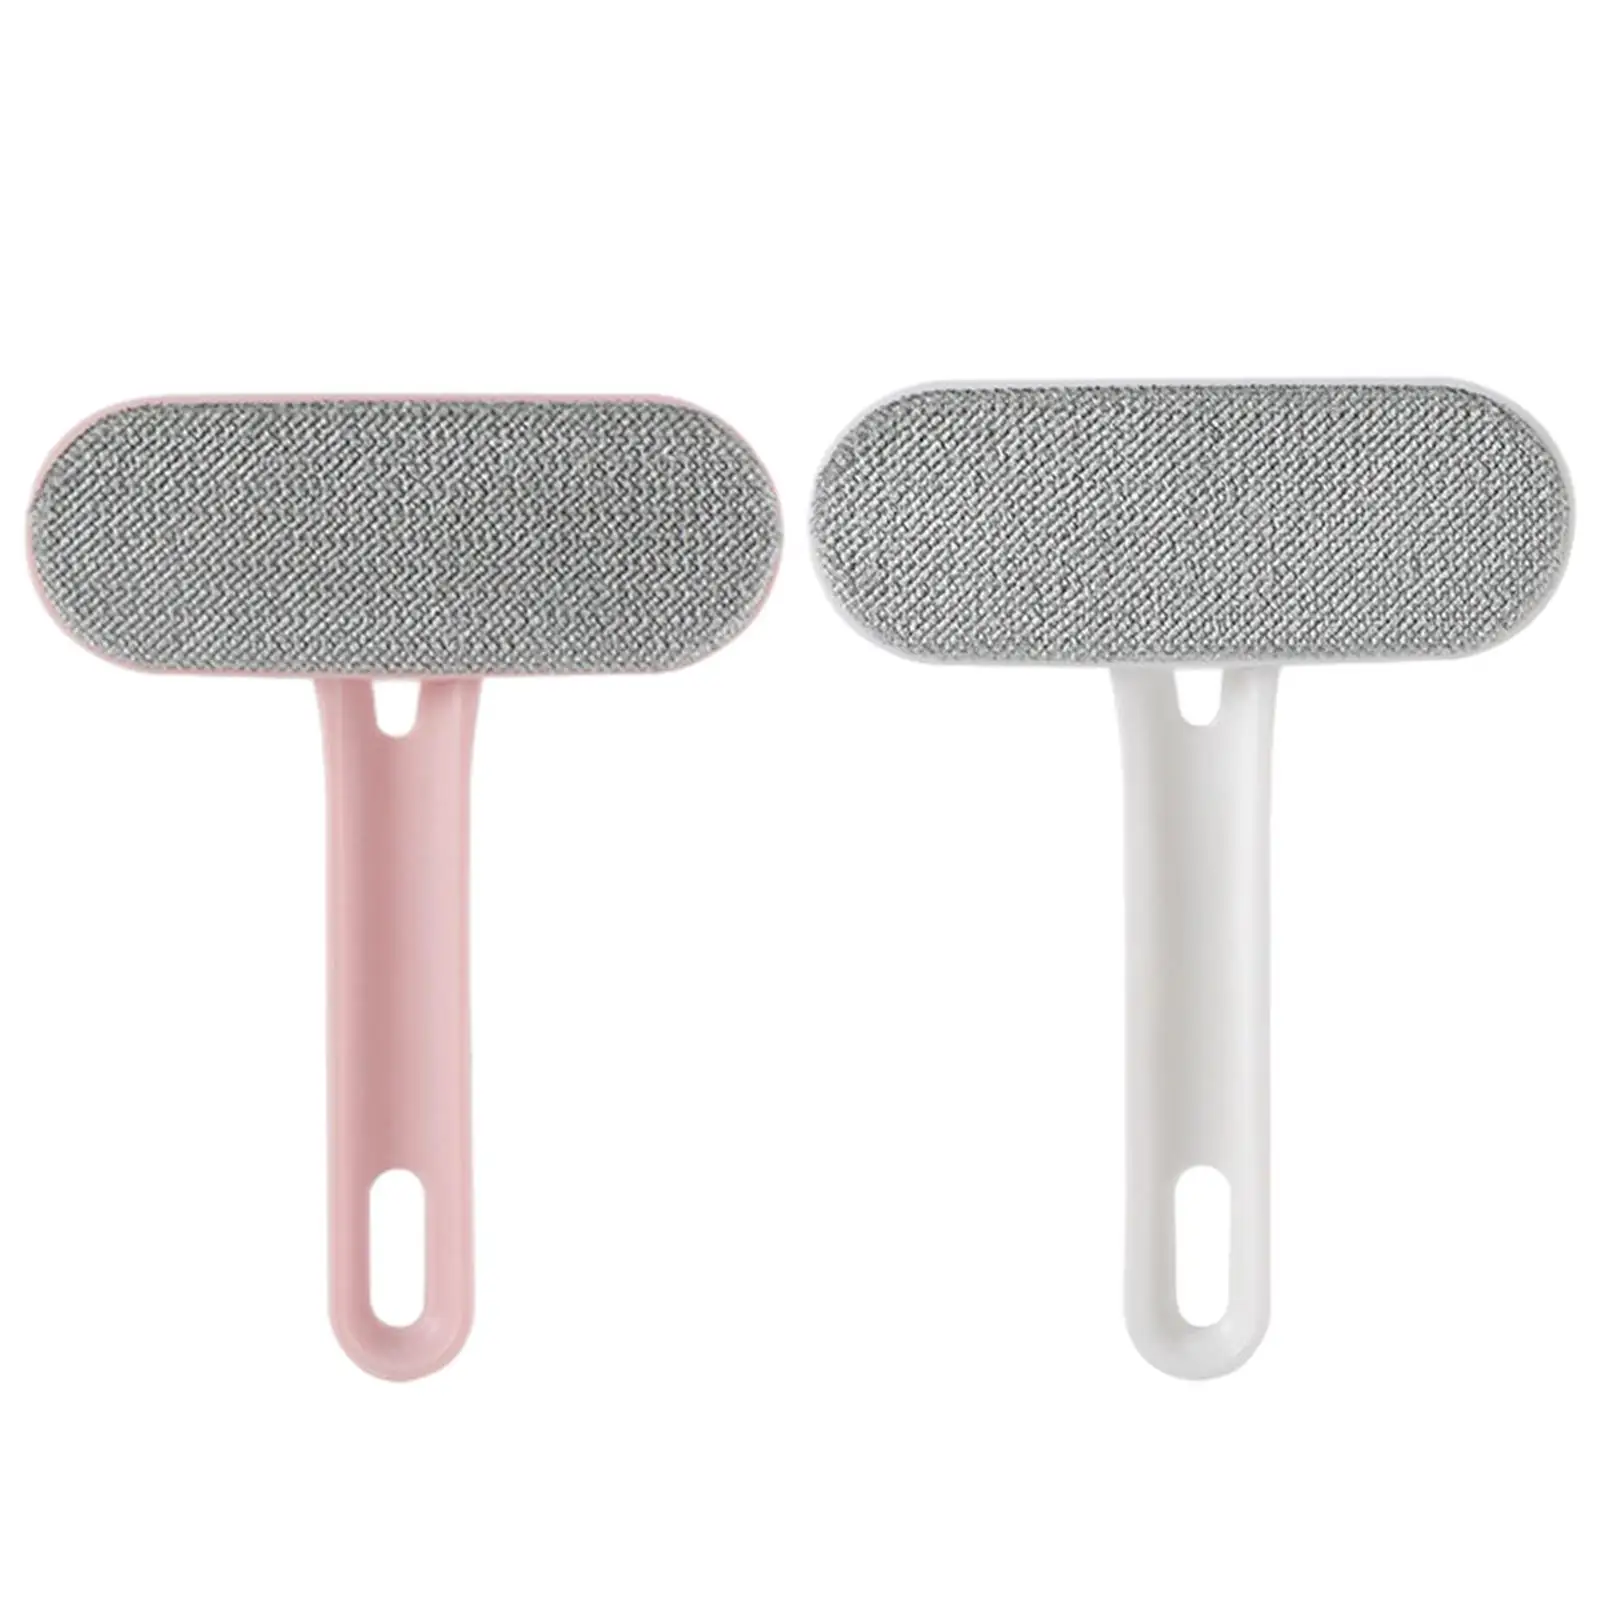 Lint Removal Brush Fabric Brush Velvet Lint Brush Coat Lint Brush Clothes Fuzz Remover for Garment Clothing Sofa Couch Bedding